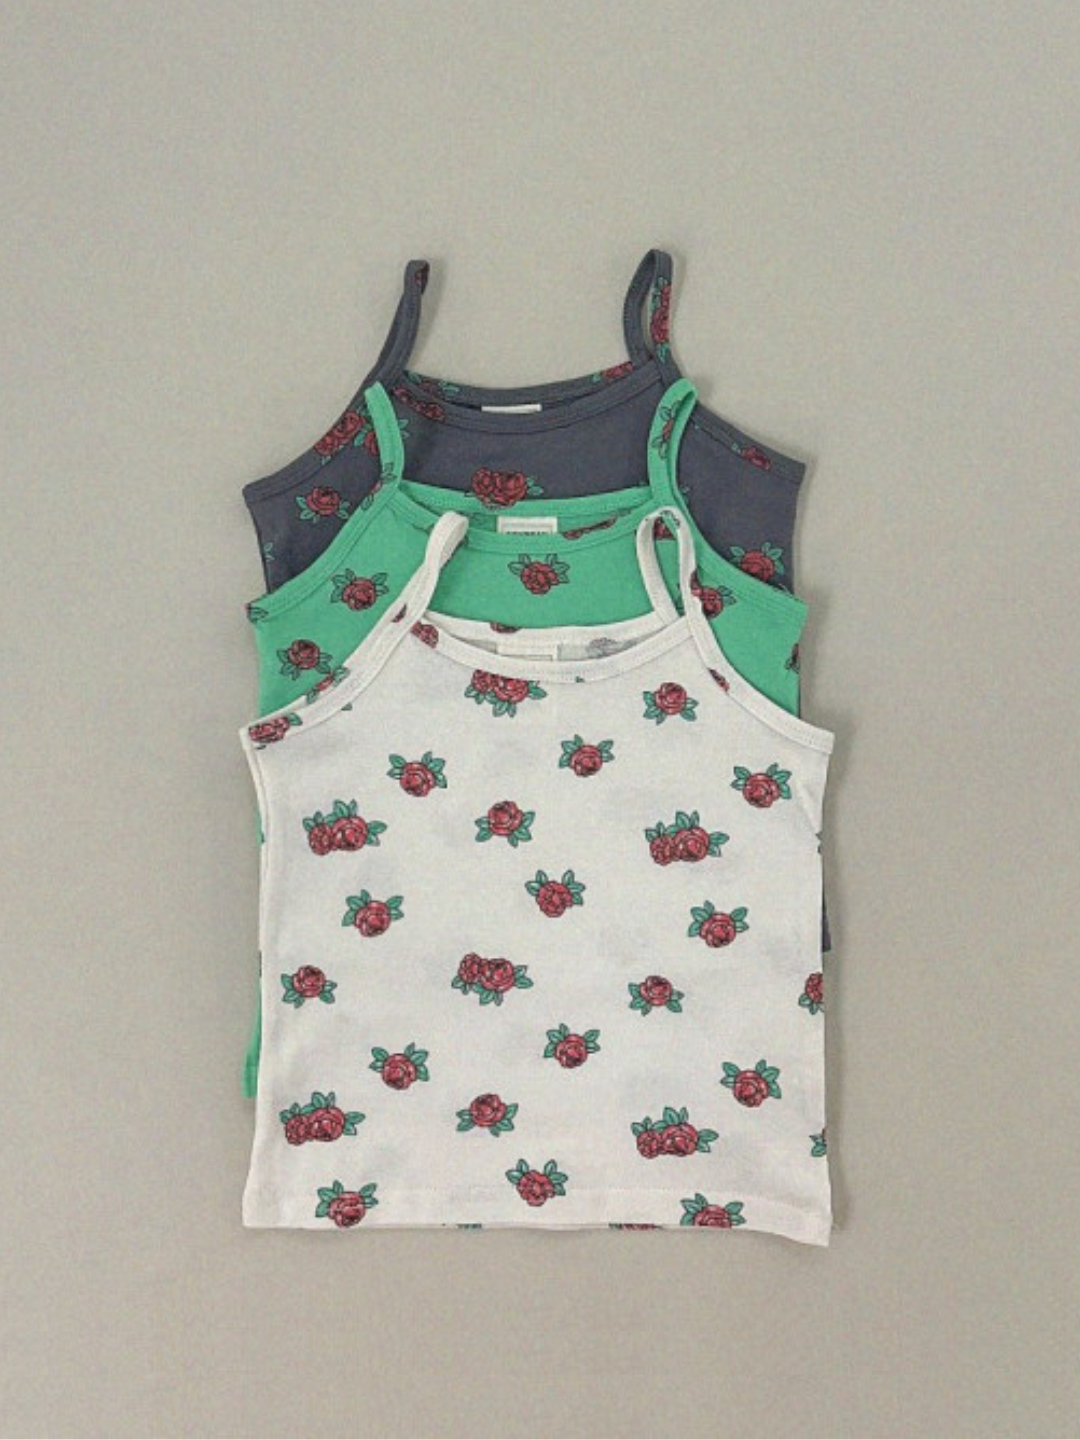 Three color ward of the kids' roses tank tops are laid flat